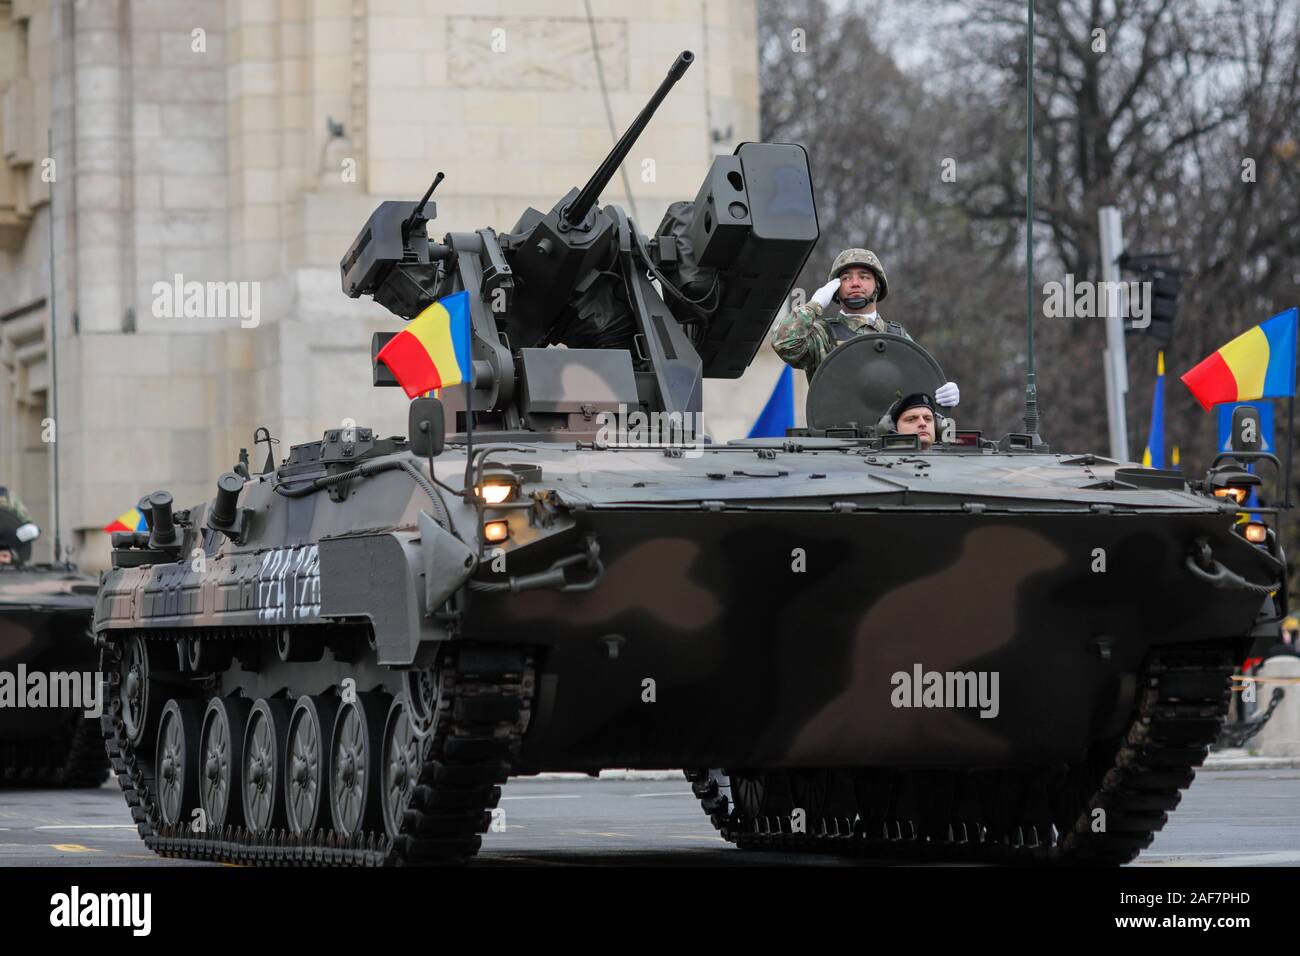 BUCHAREST, ROMANIA - December 1, 2019: MLI 84 M combat armored vehicle, at Romanian National Day military parade passes under the Arch of Triumph Stock Photo